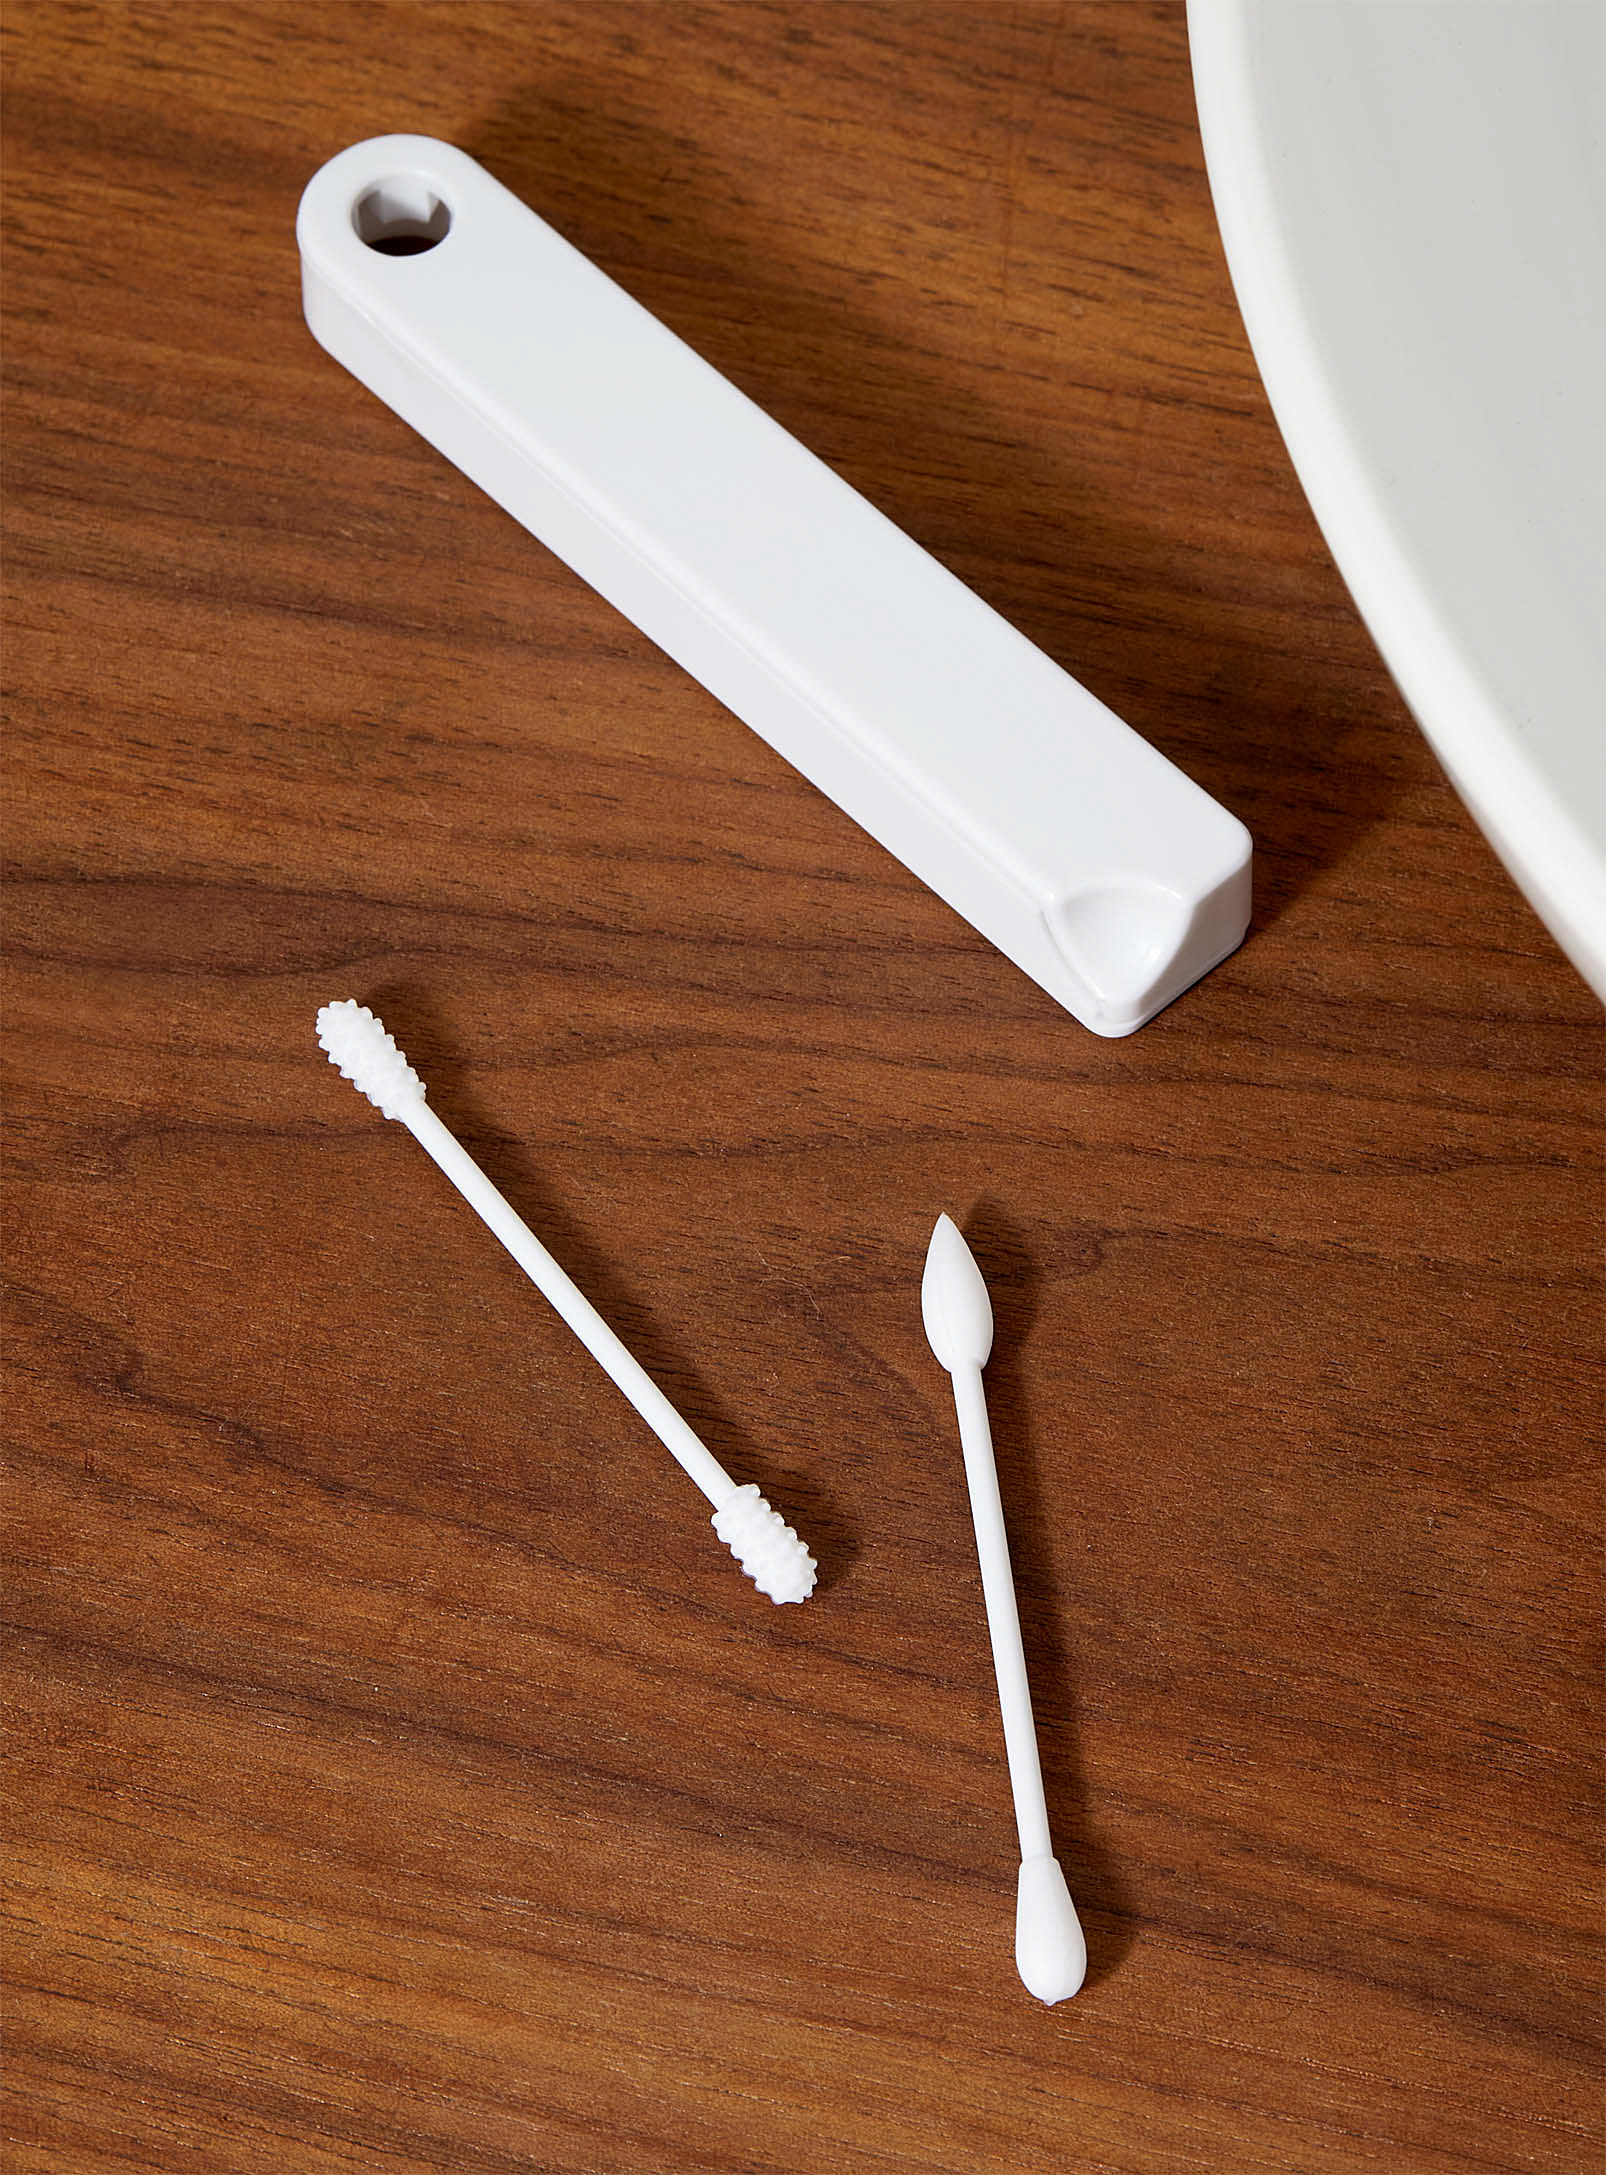 the silicone swabs on a table next to the carrying case